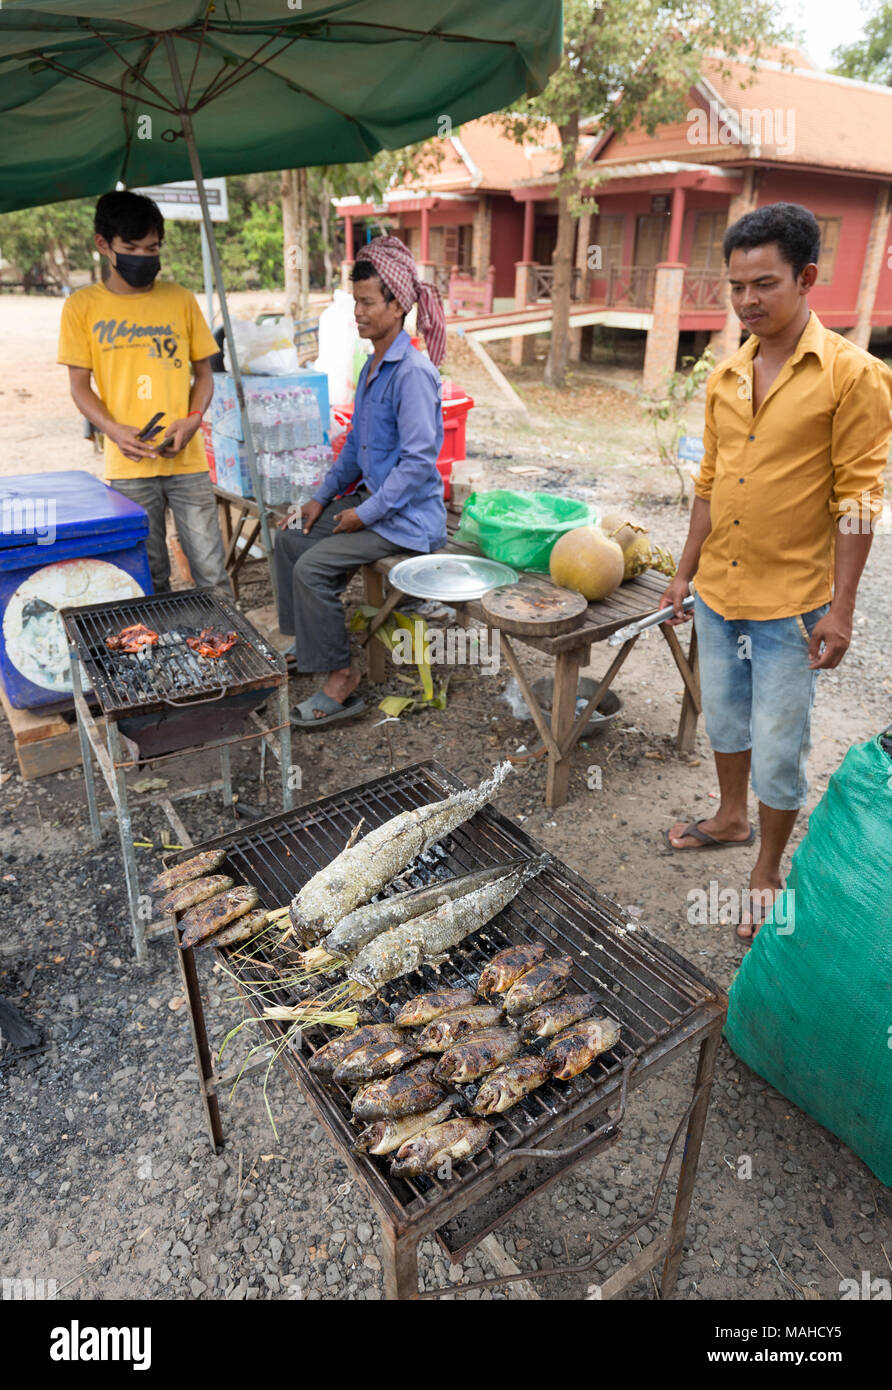 Cambodia street food - stalls grilling fish and other seafood for sale, Kampong Thom, Cambodia Asia Stock Photo